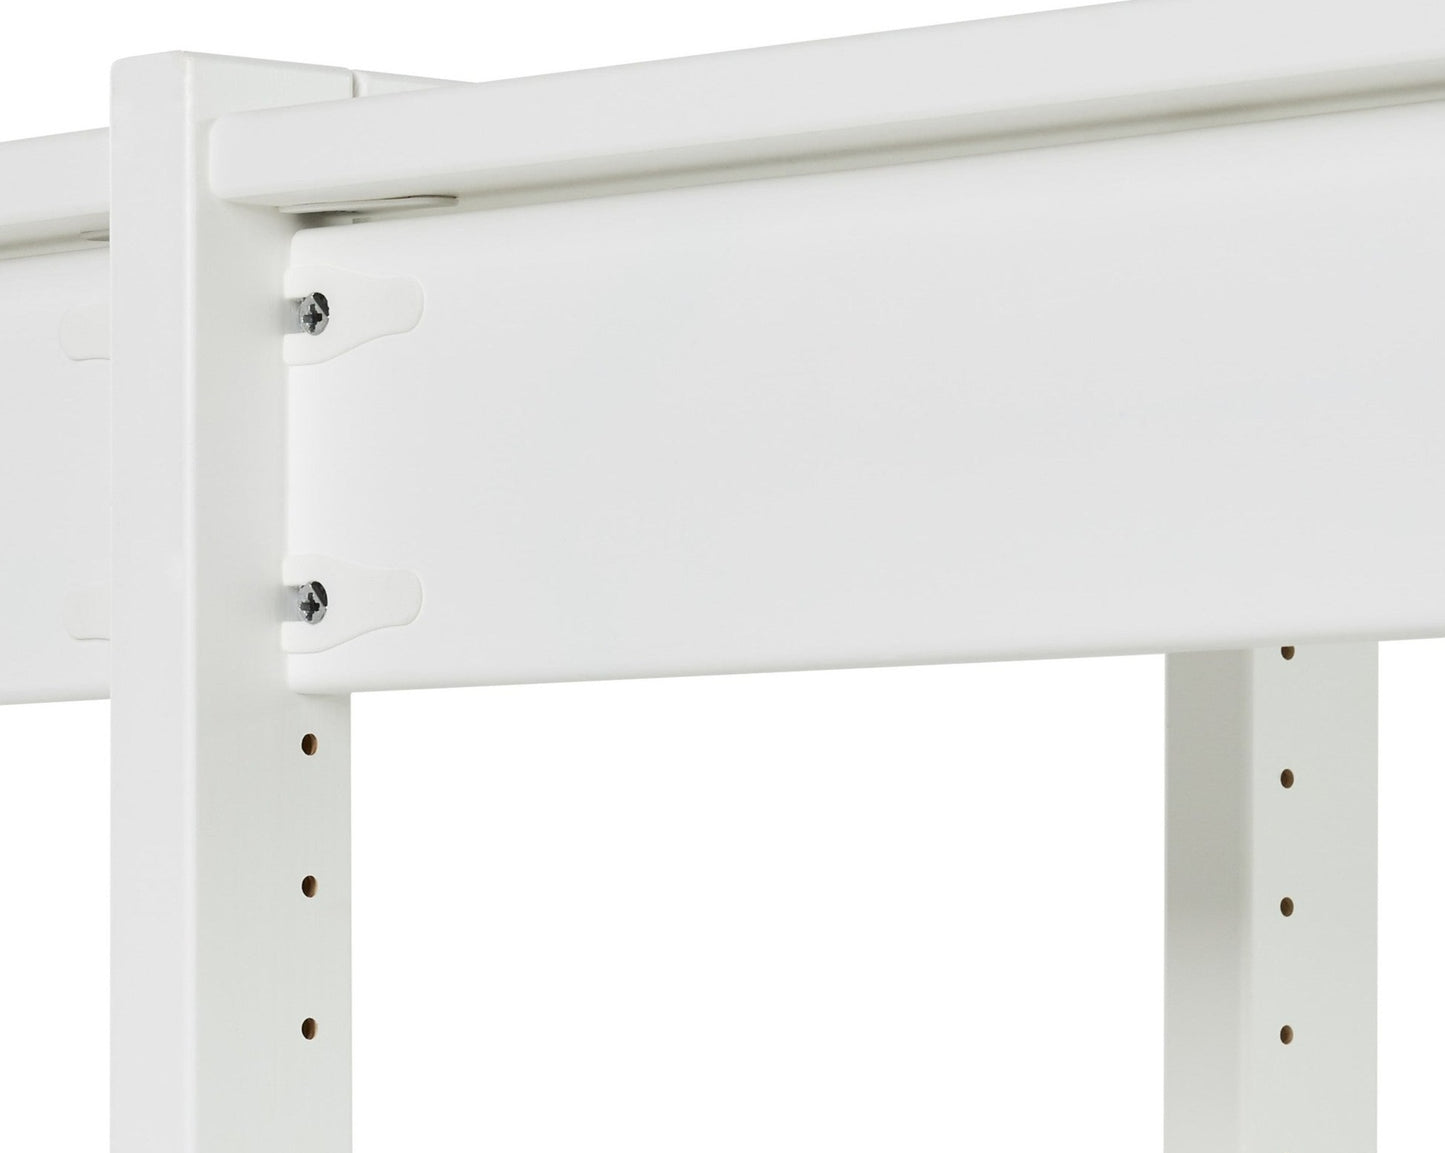 Storey - Shelf with 2 sections and 8 shelves - 100 cm - White